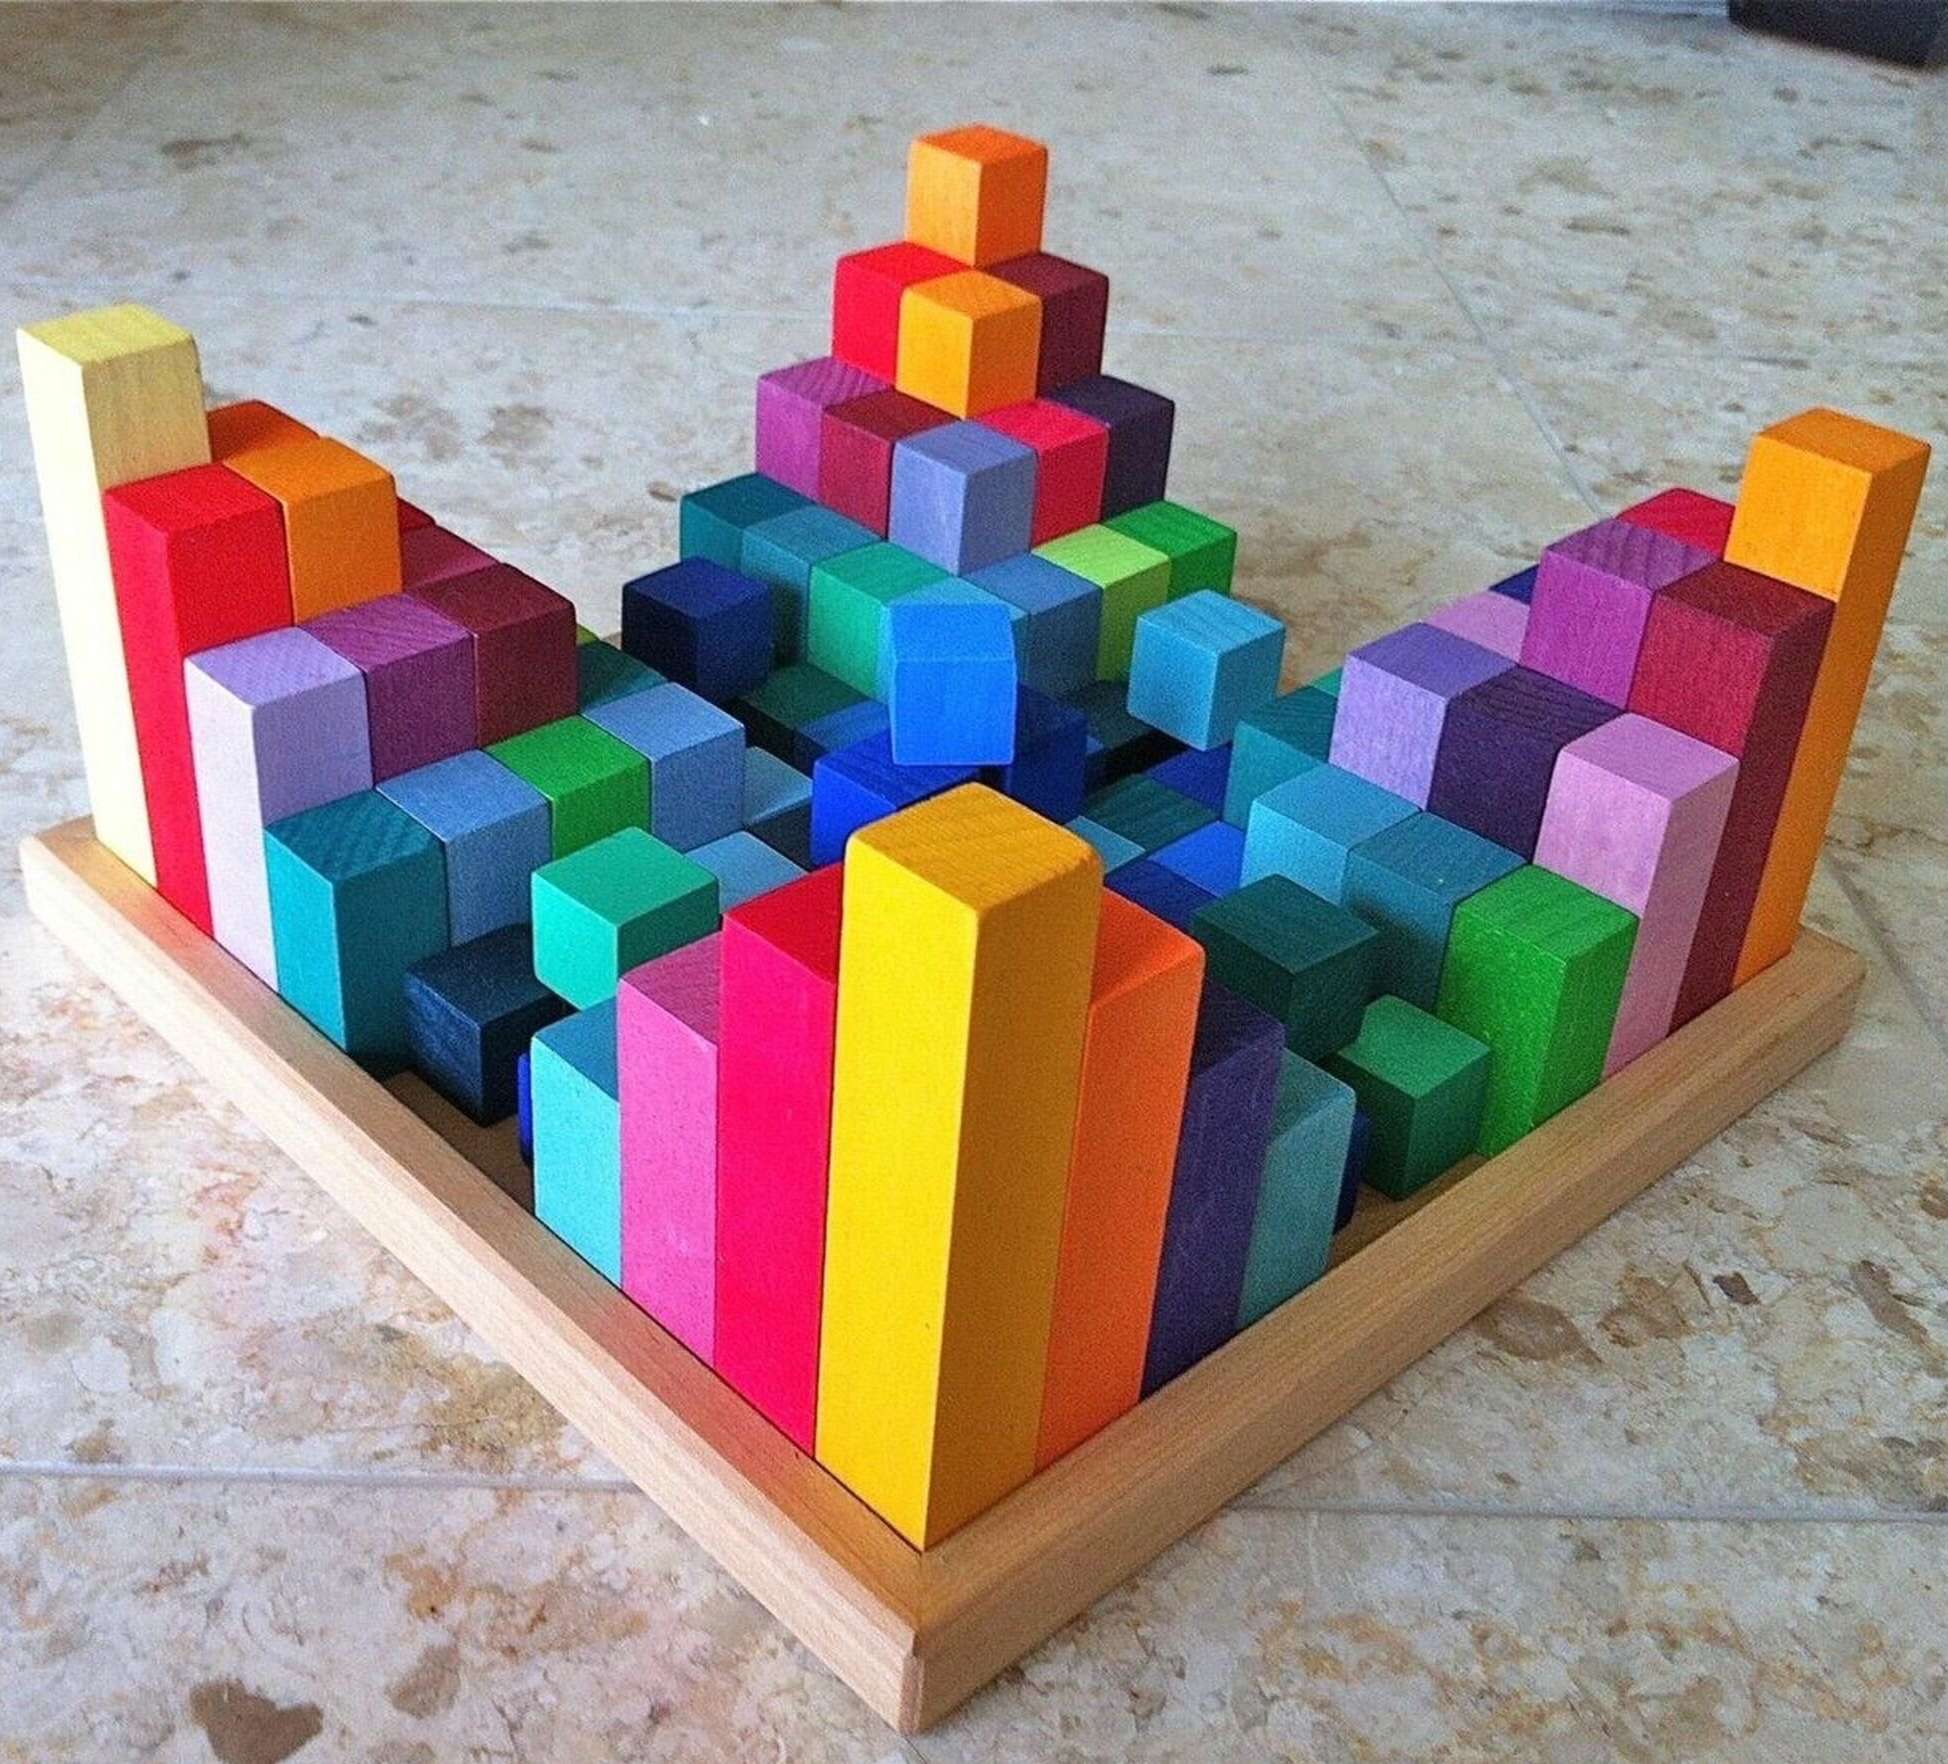 Stepped Counting Blocks For Math Color Educational Toys For 2 Year Olds, Montessori Wooden Toys